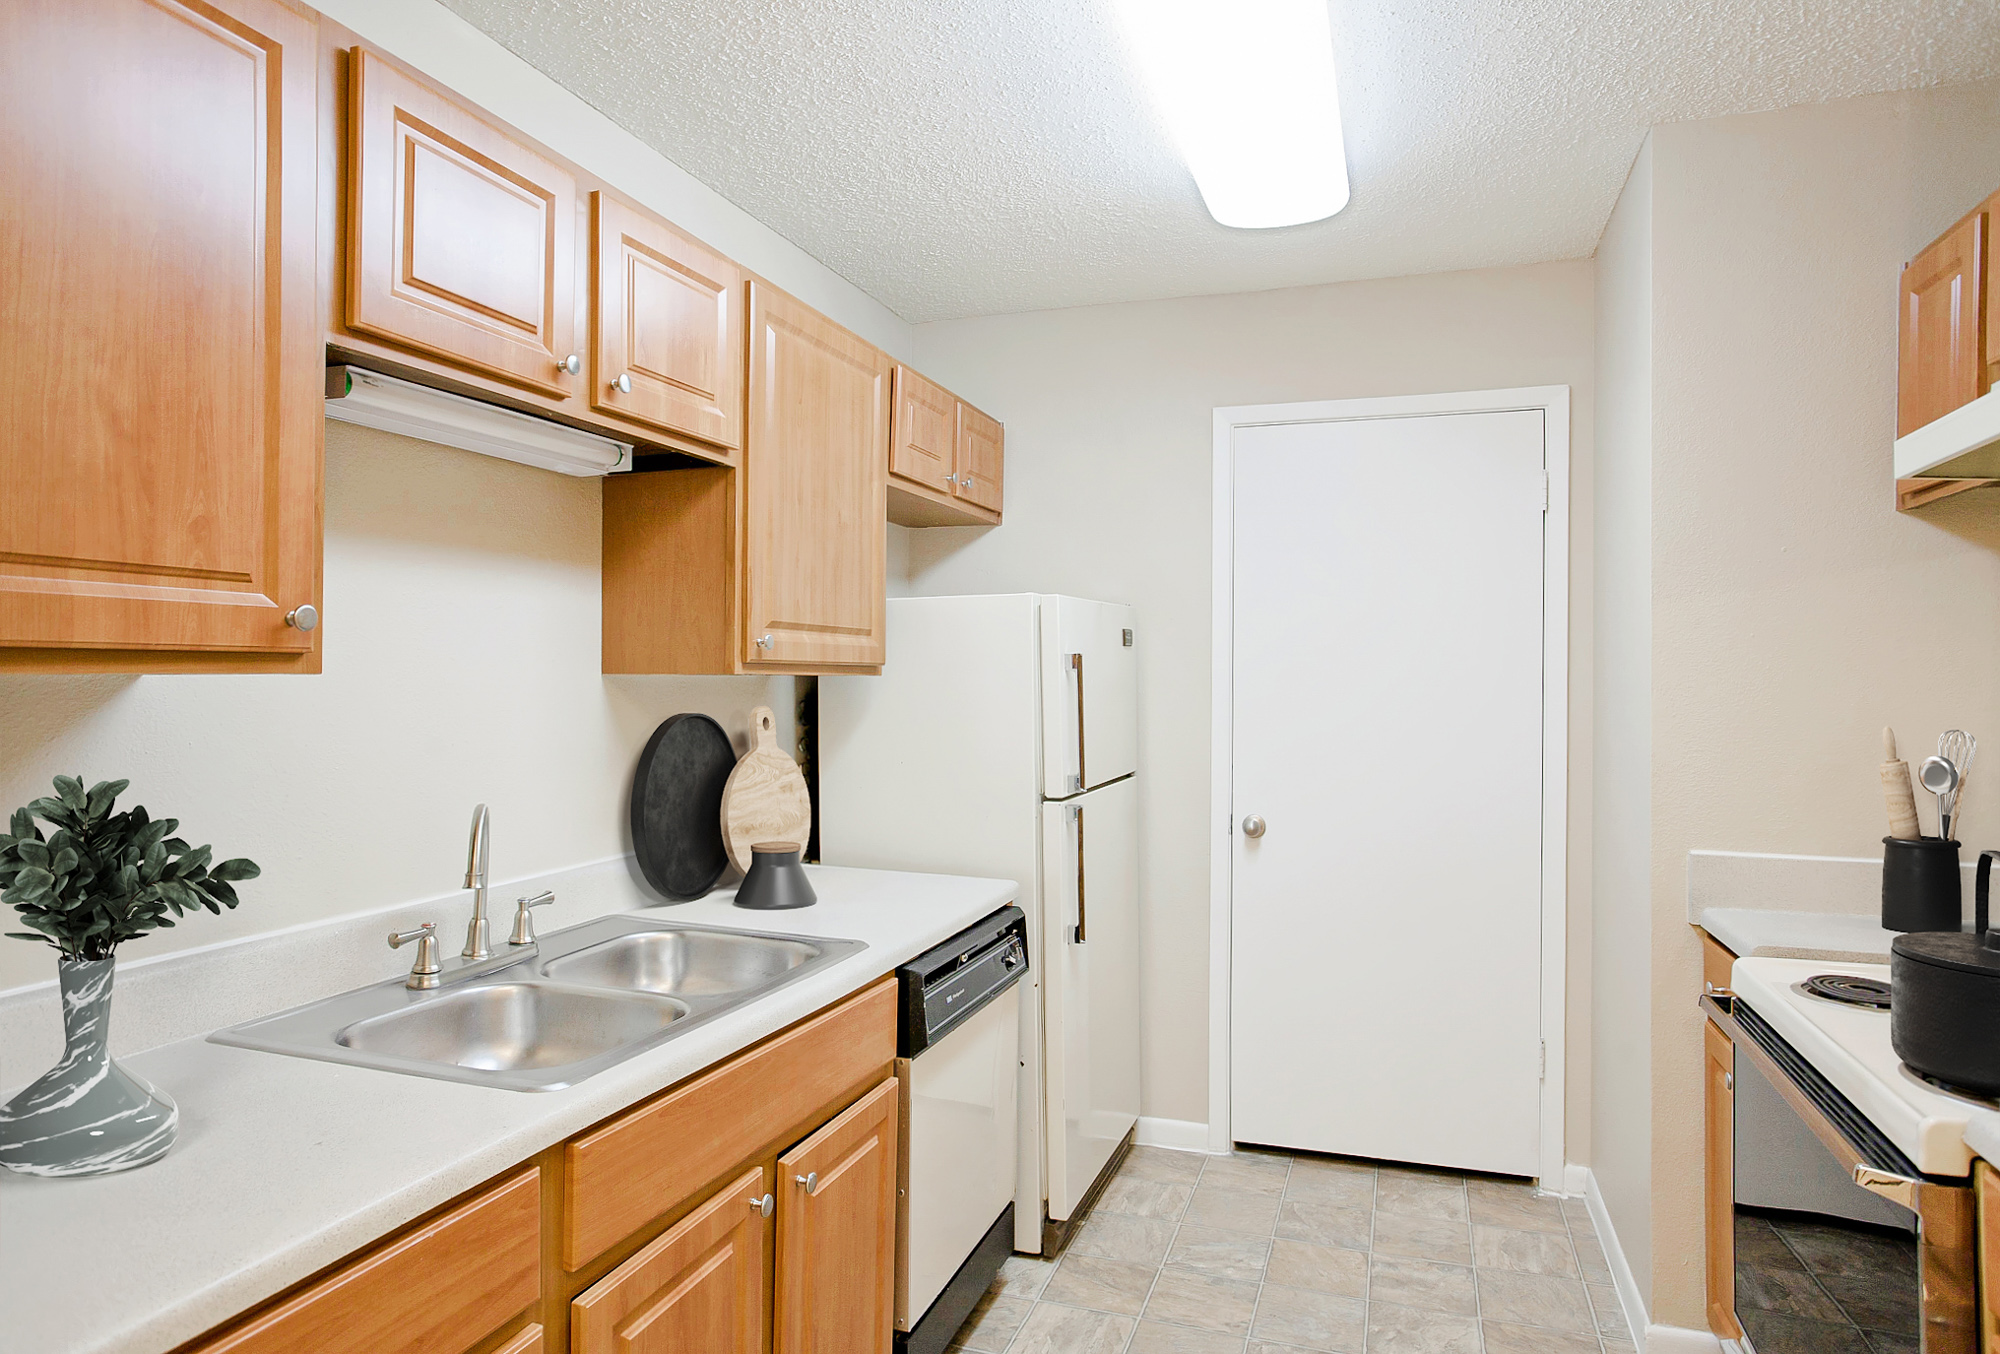 The kitchen of an apartment at The Arbors of Wells Branch in Austin, TX.